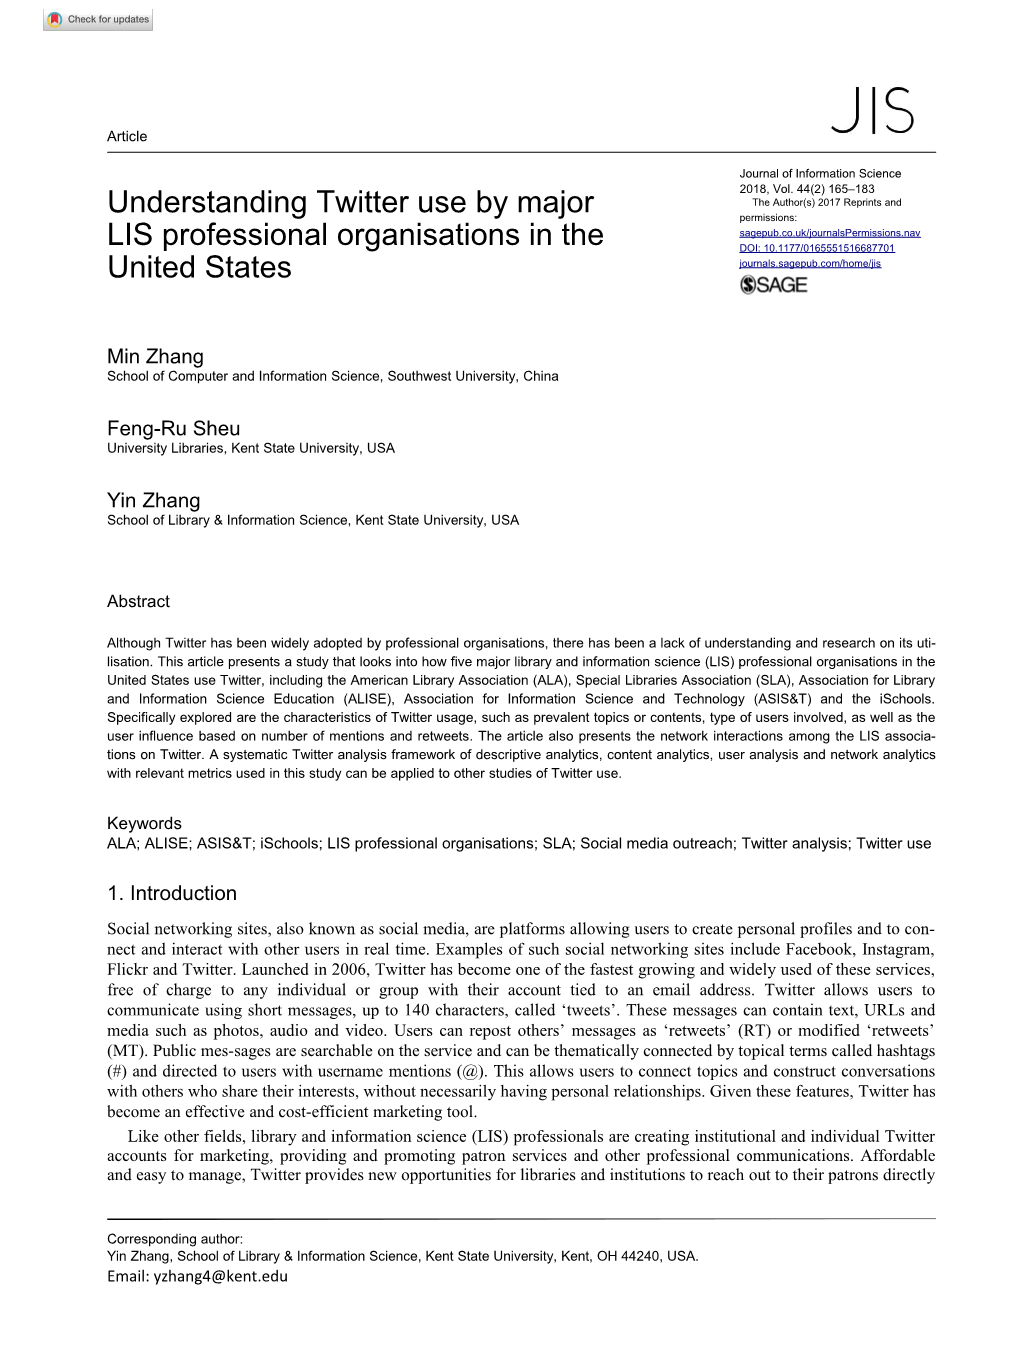 Understanding Twitter Use by Major LIS Professional Organisations in the United States